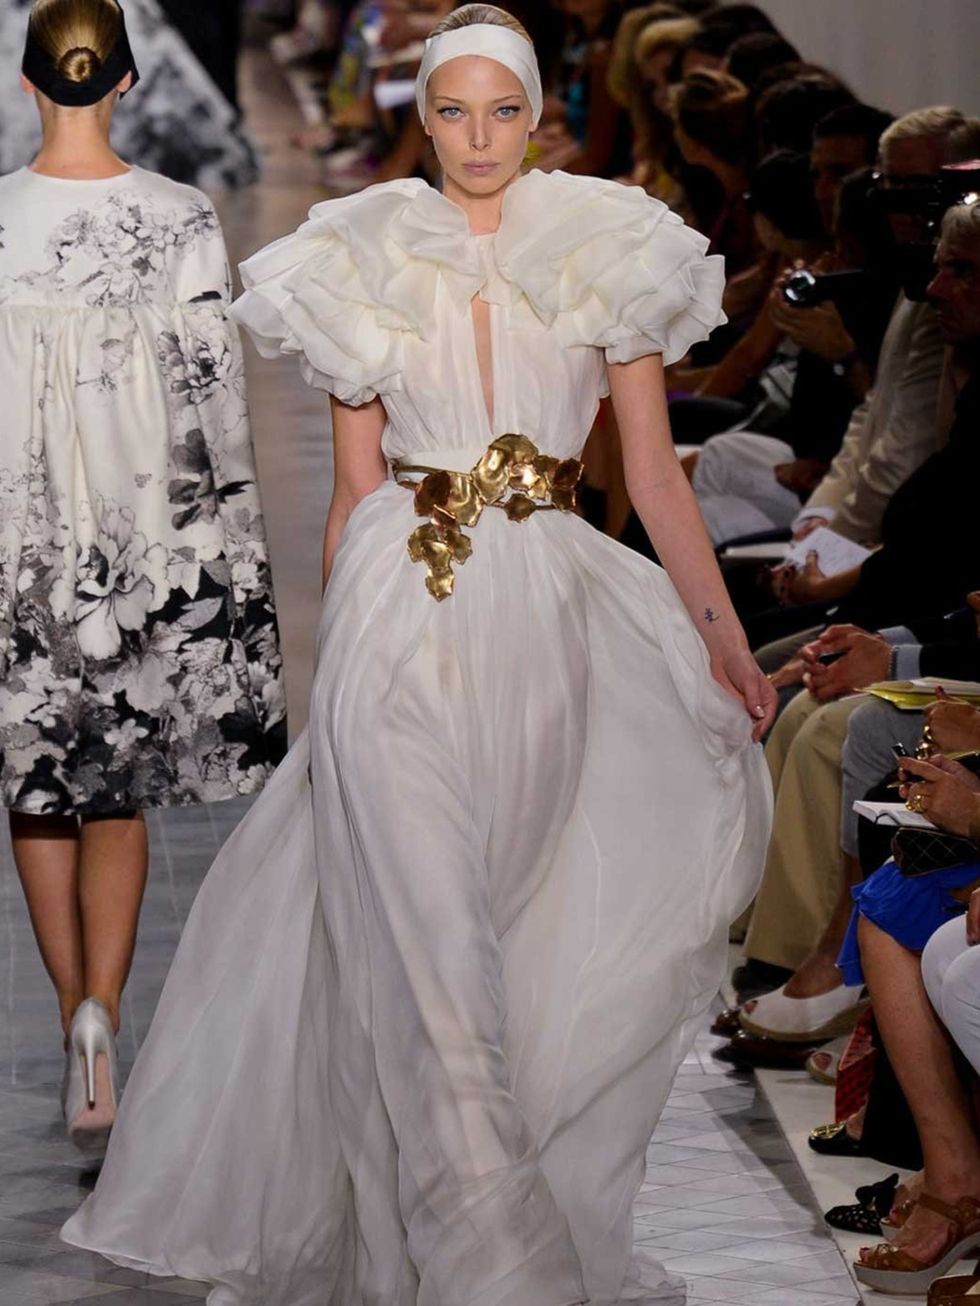 <p>Jessica Biel married in Giambattista Valli dress this weekend - was it one of these? </p>